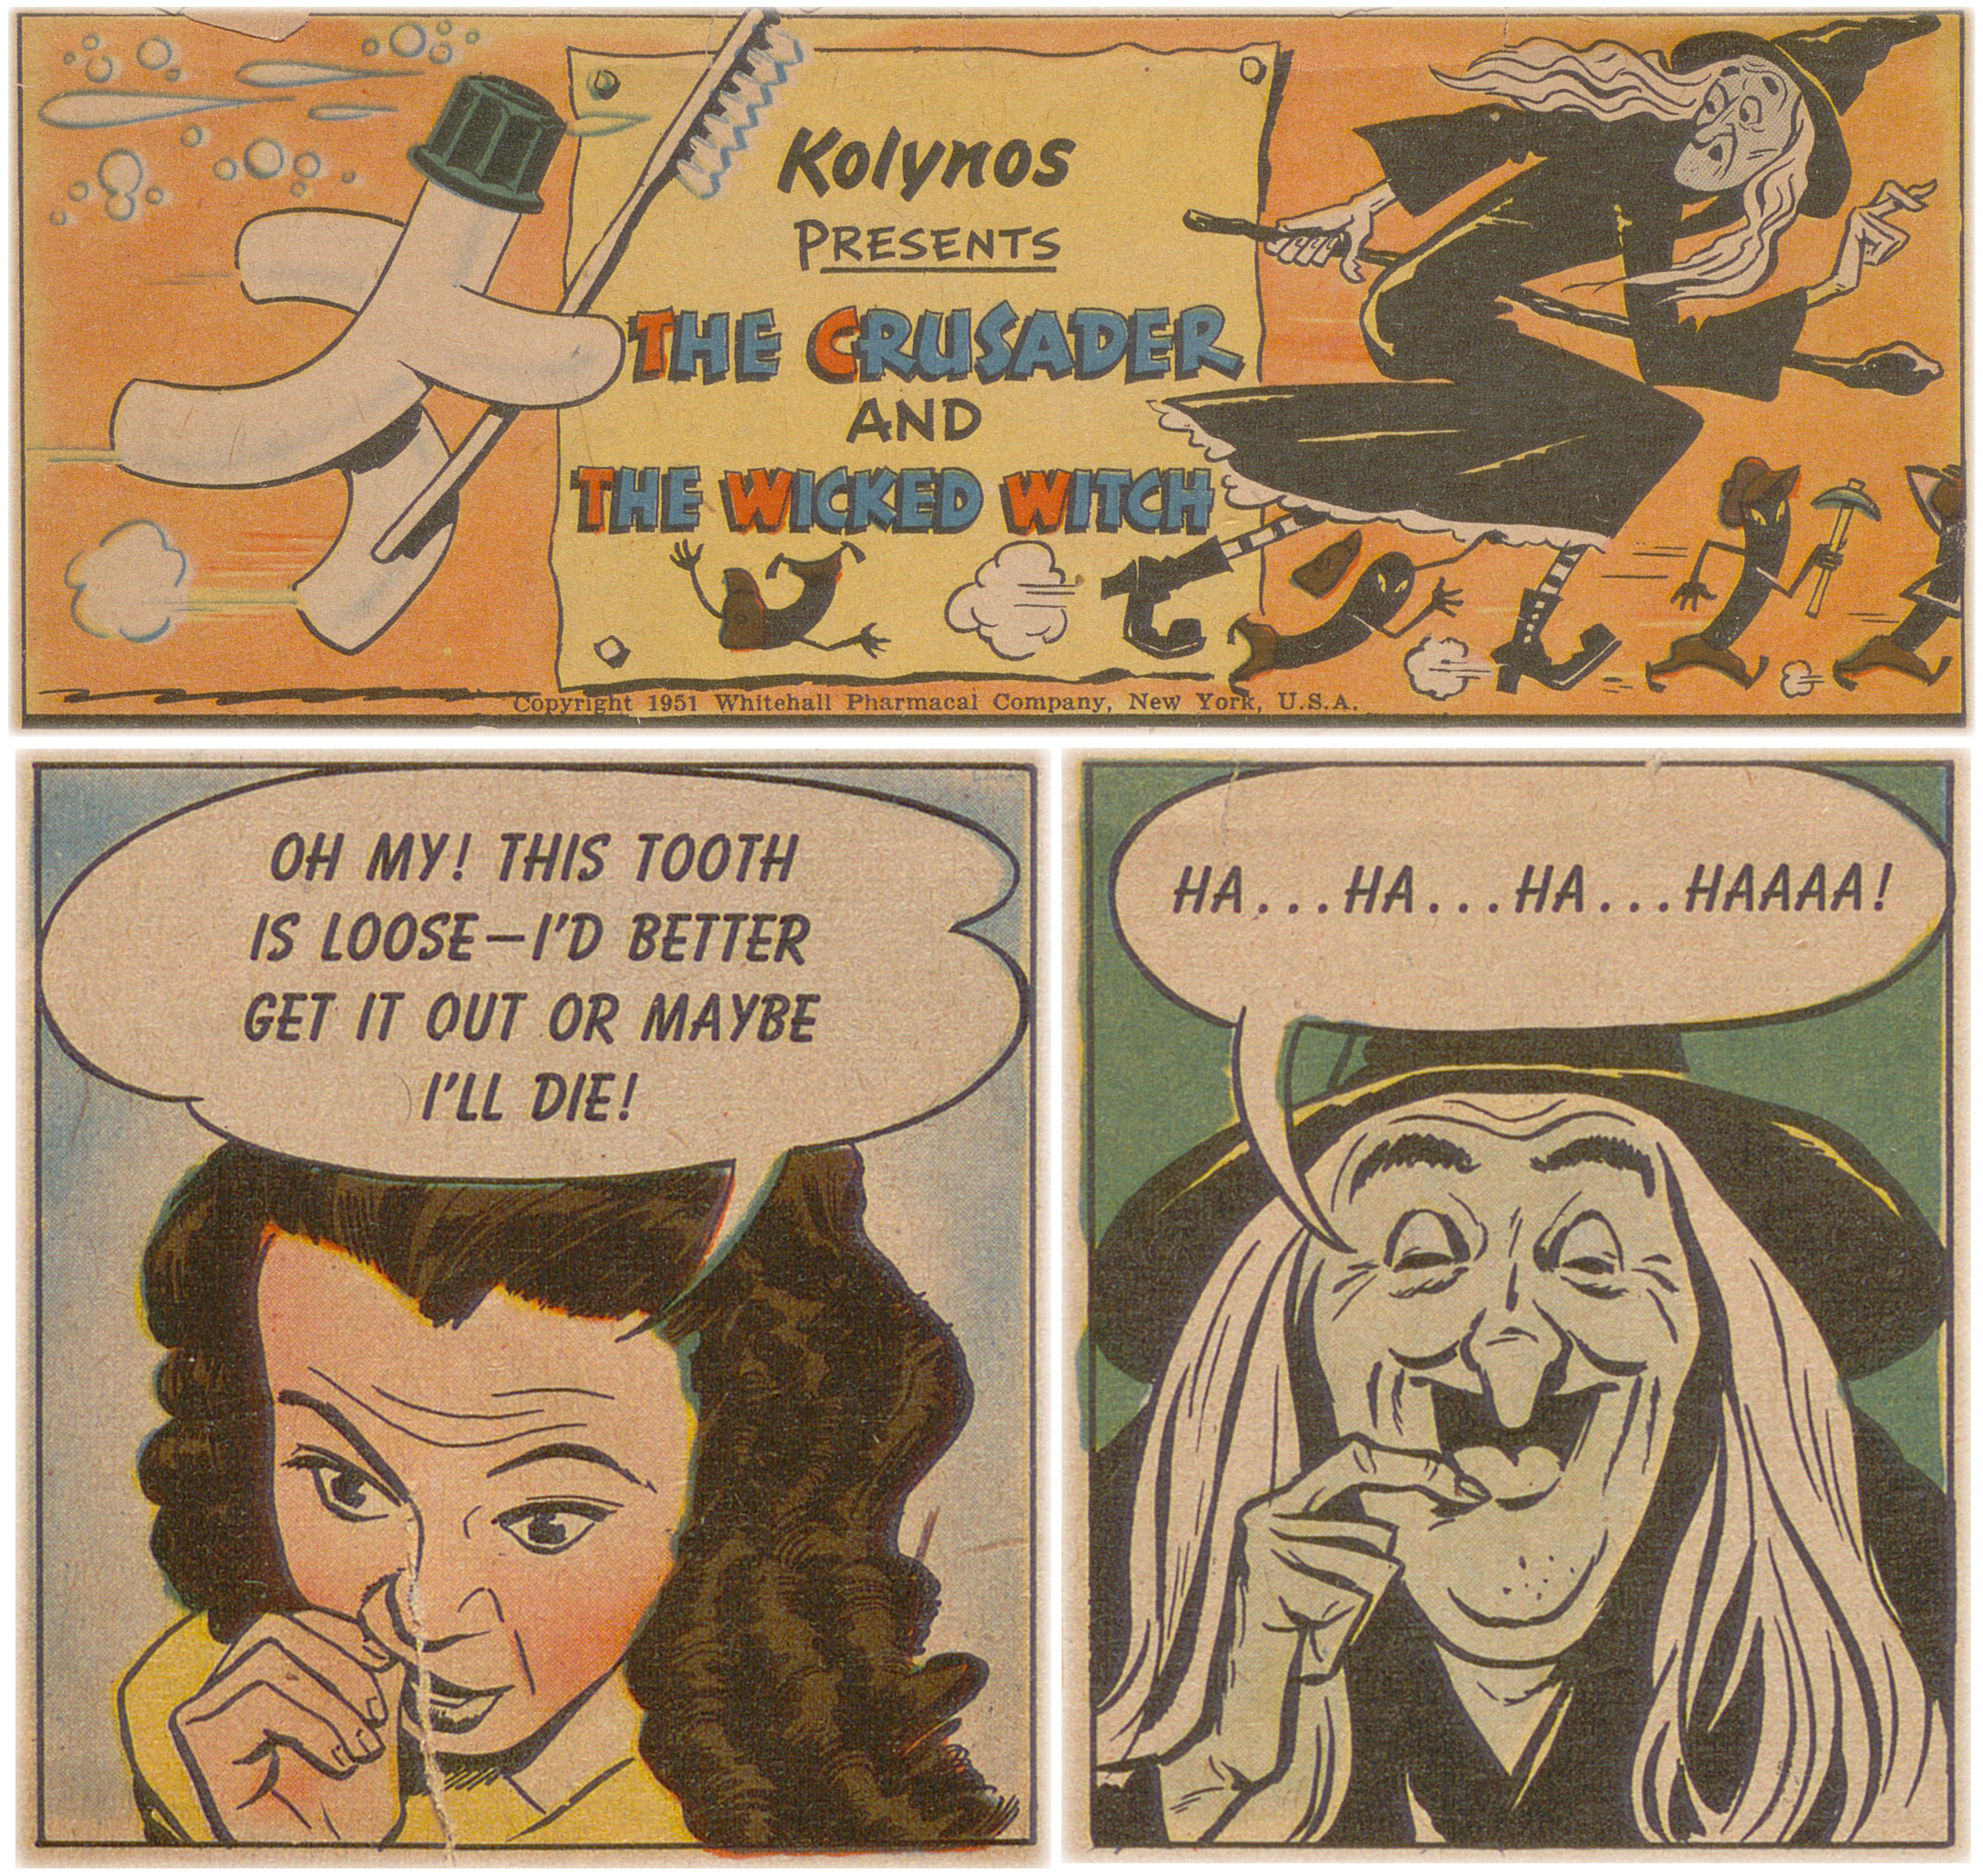 Color illustrations from a comic book about dental care featuring a witch and small children.